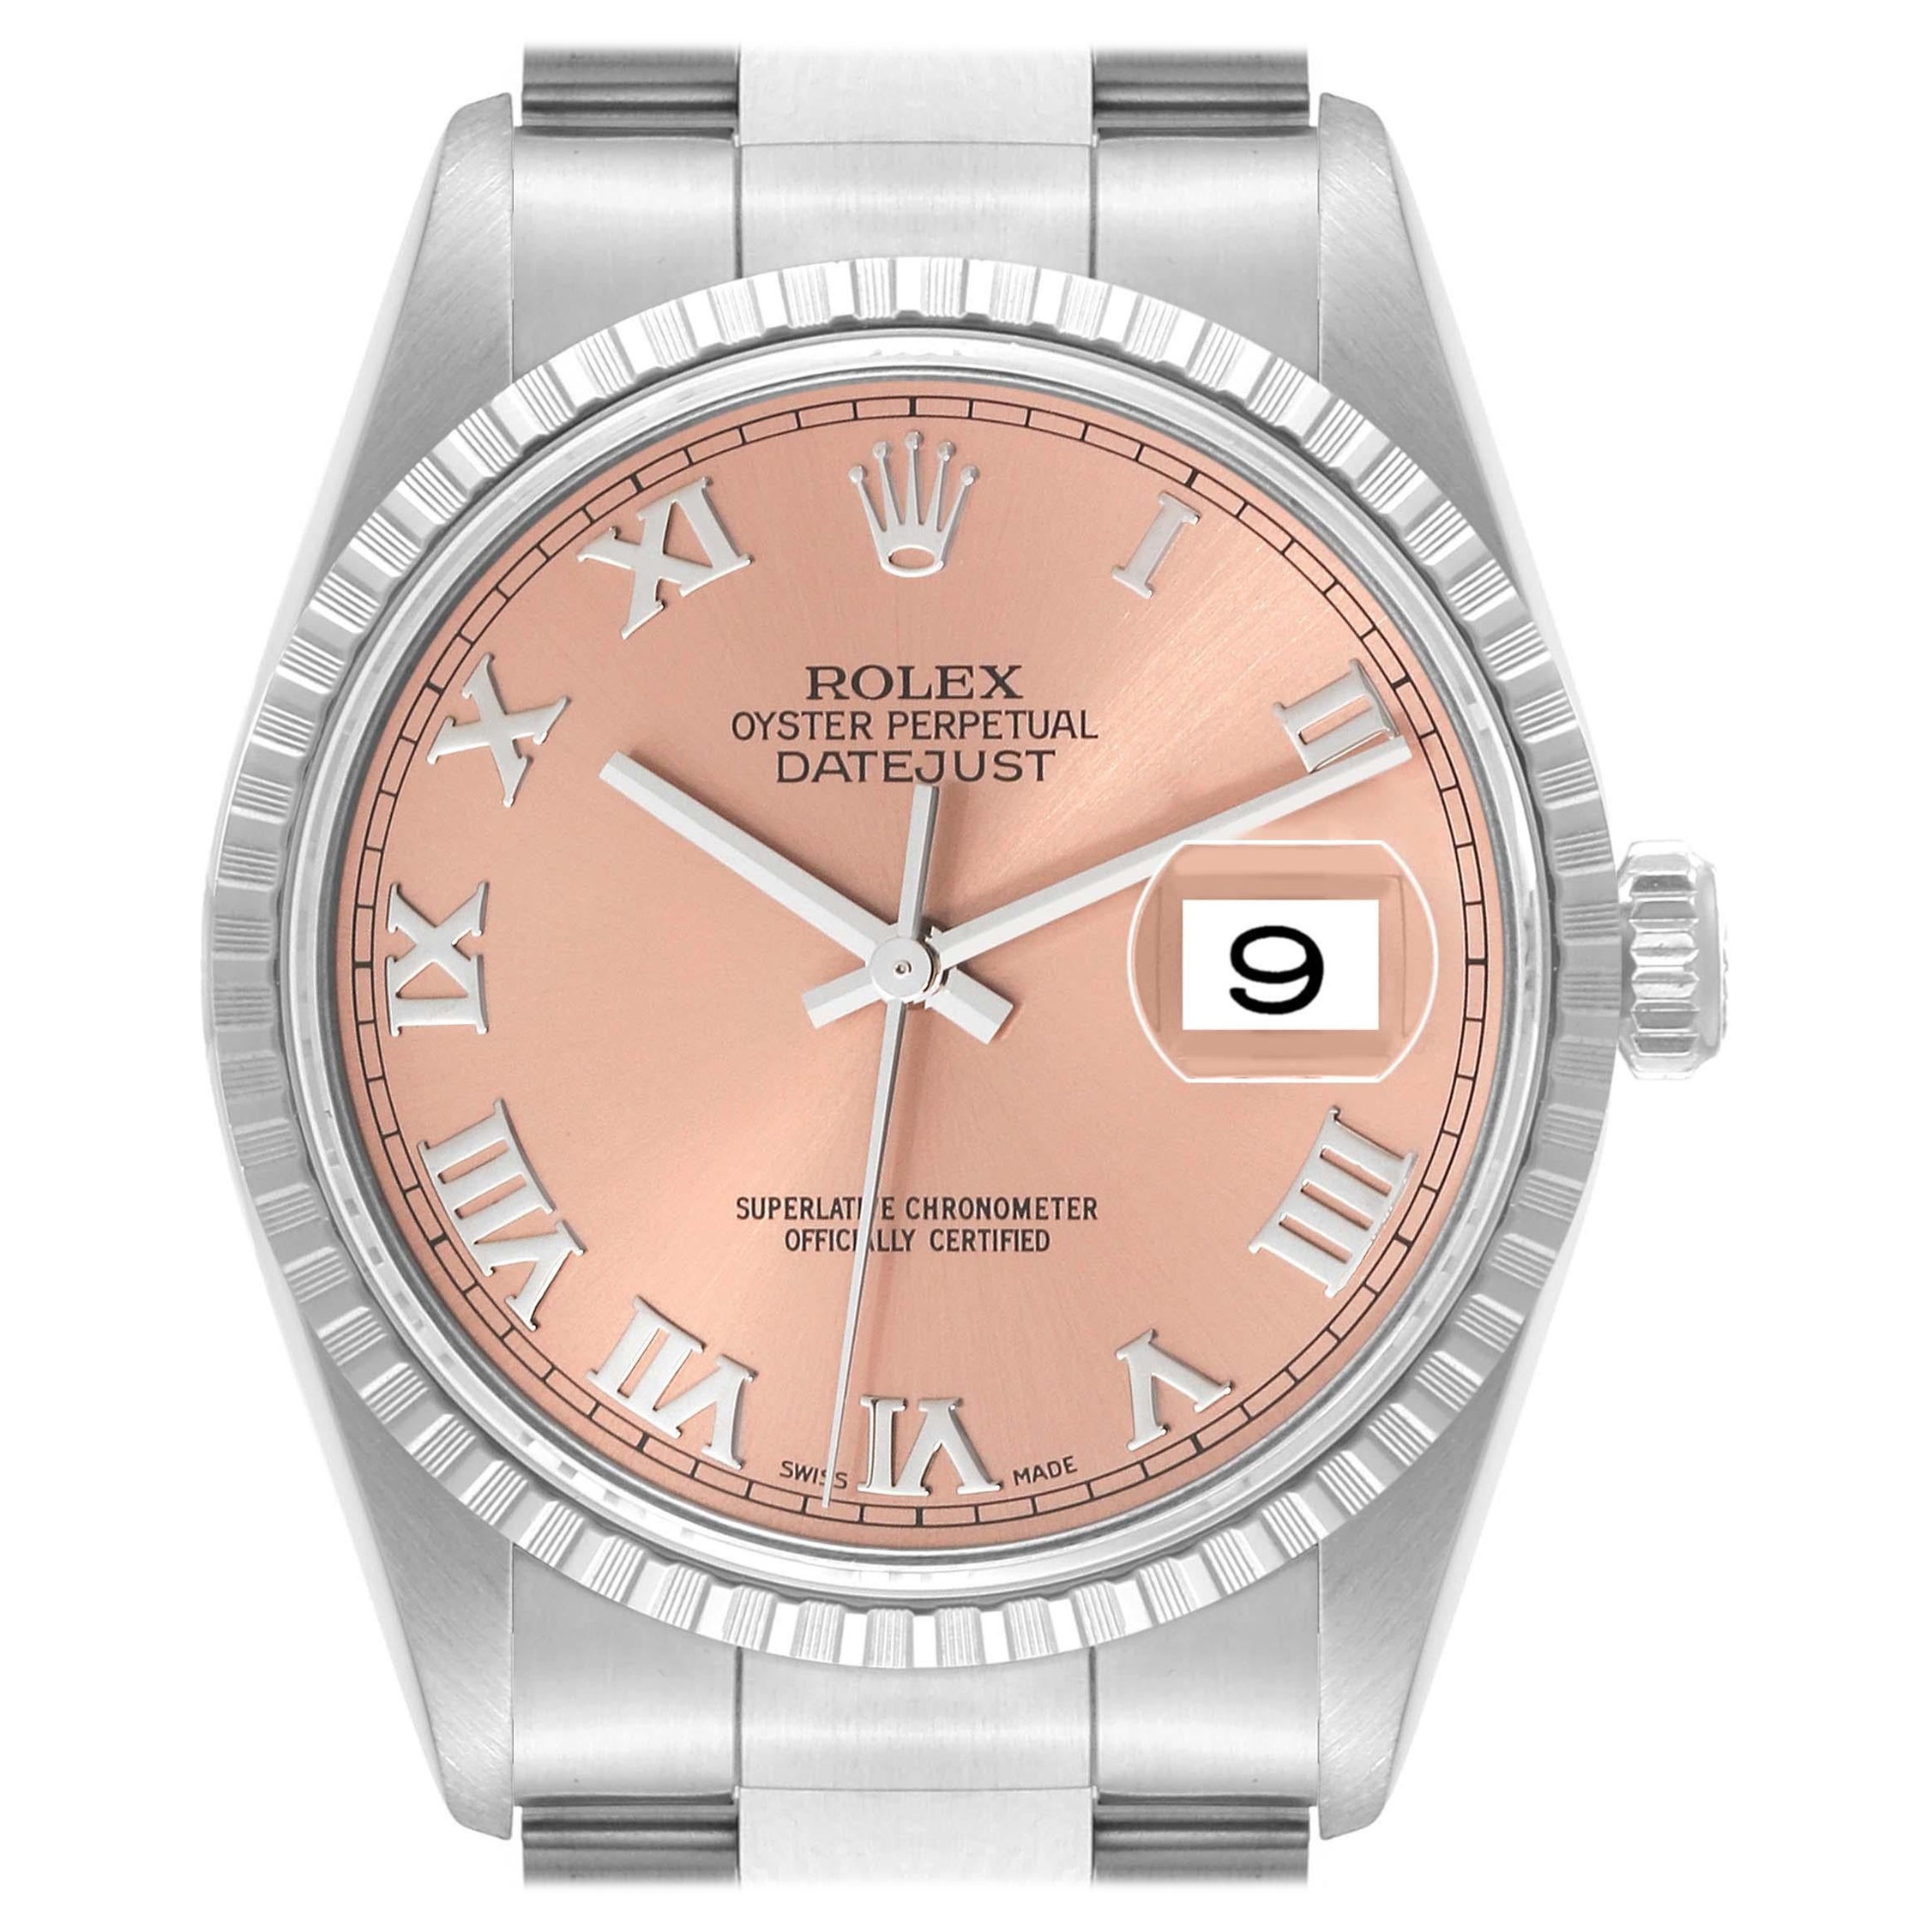 Rolex Datejust 36 Salmon Roman Dial Steel Mens Watch 16220 Box Papers For Sale